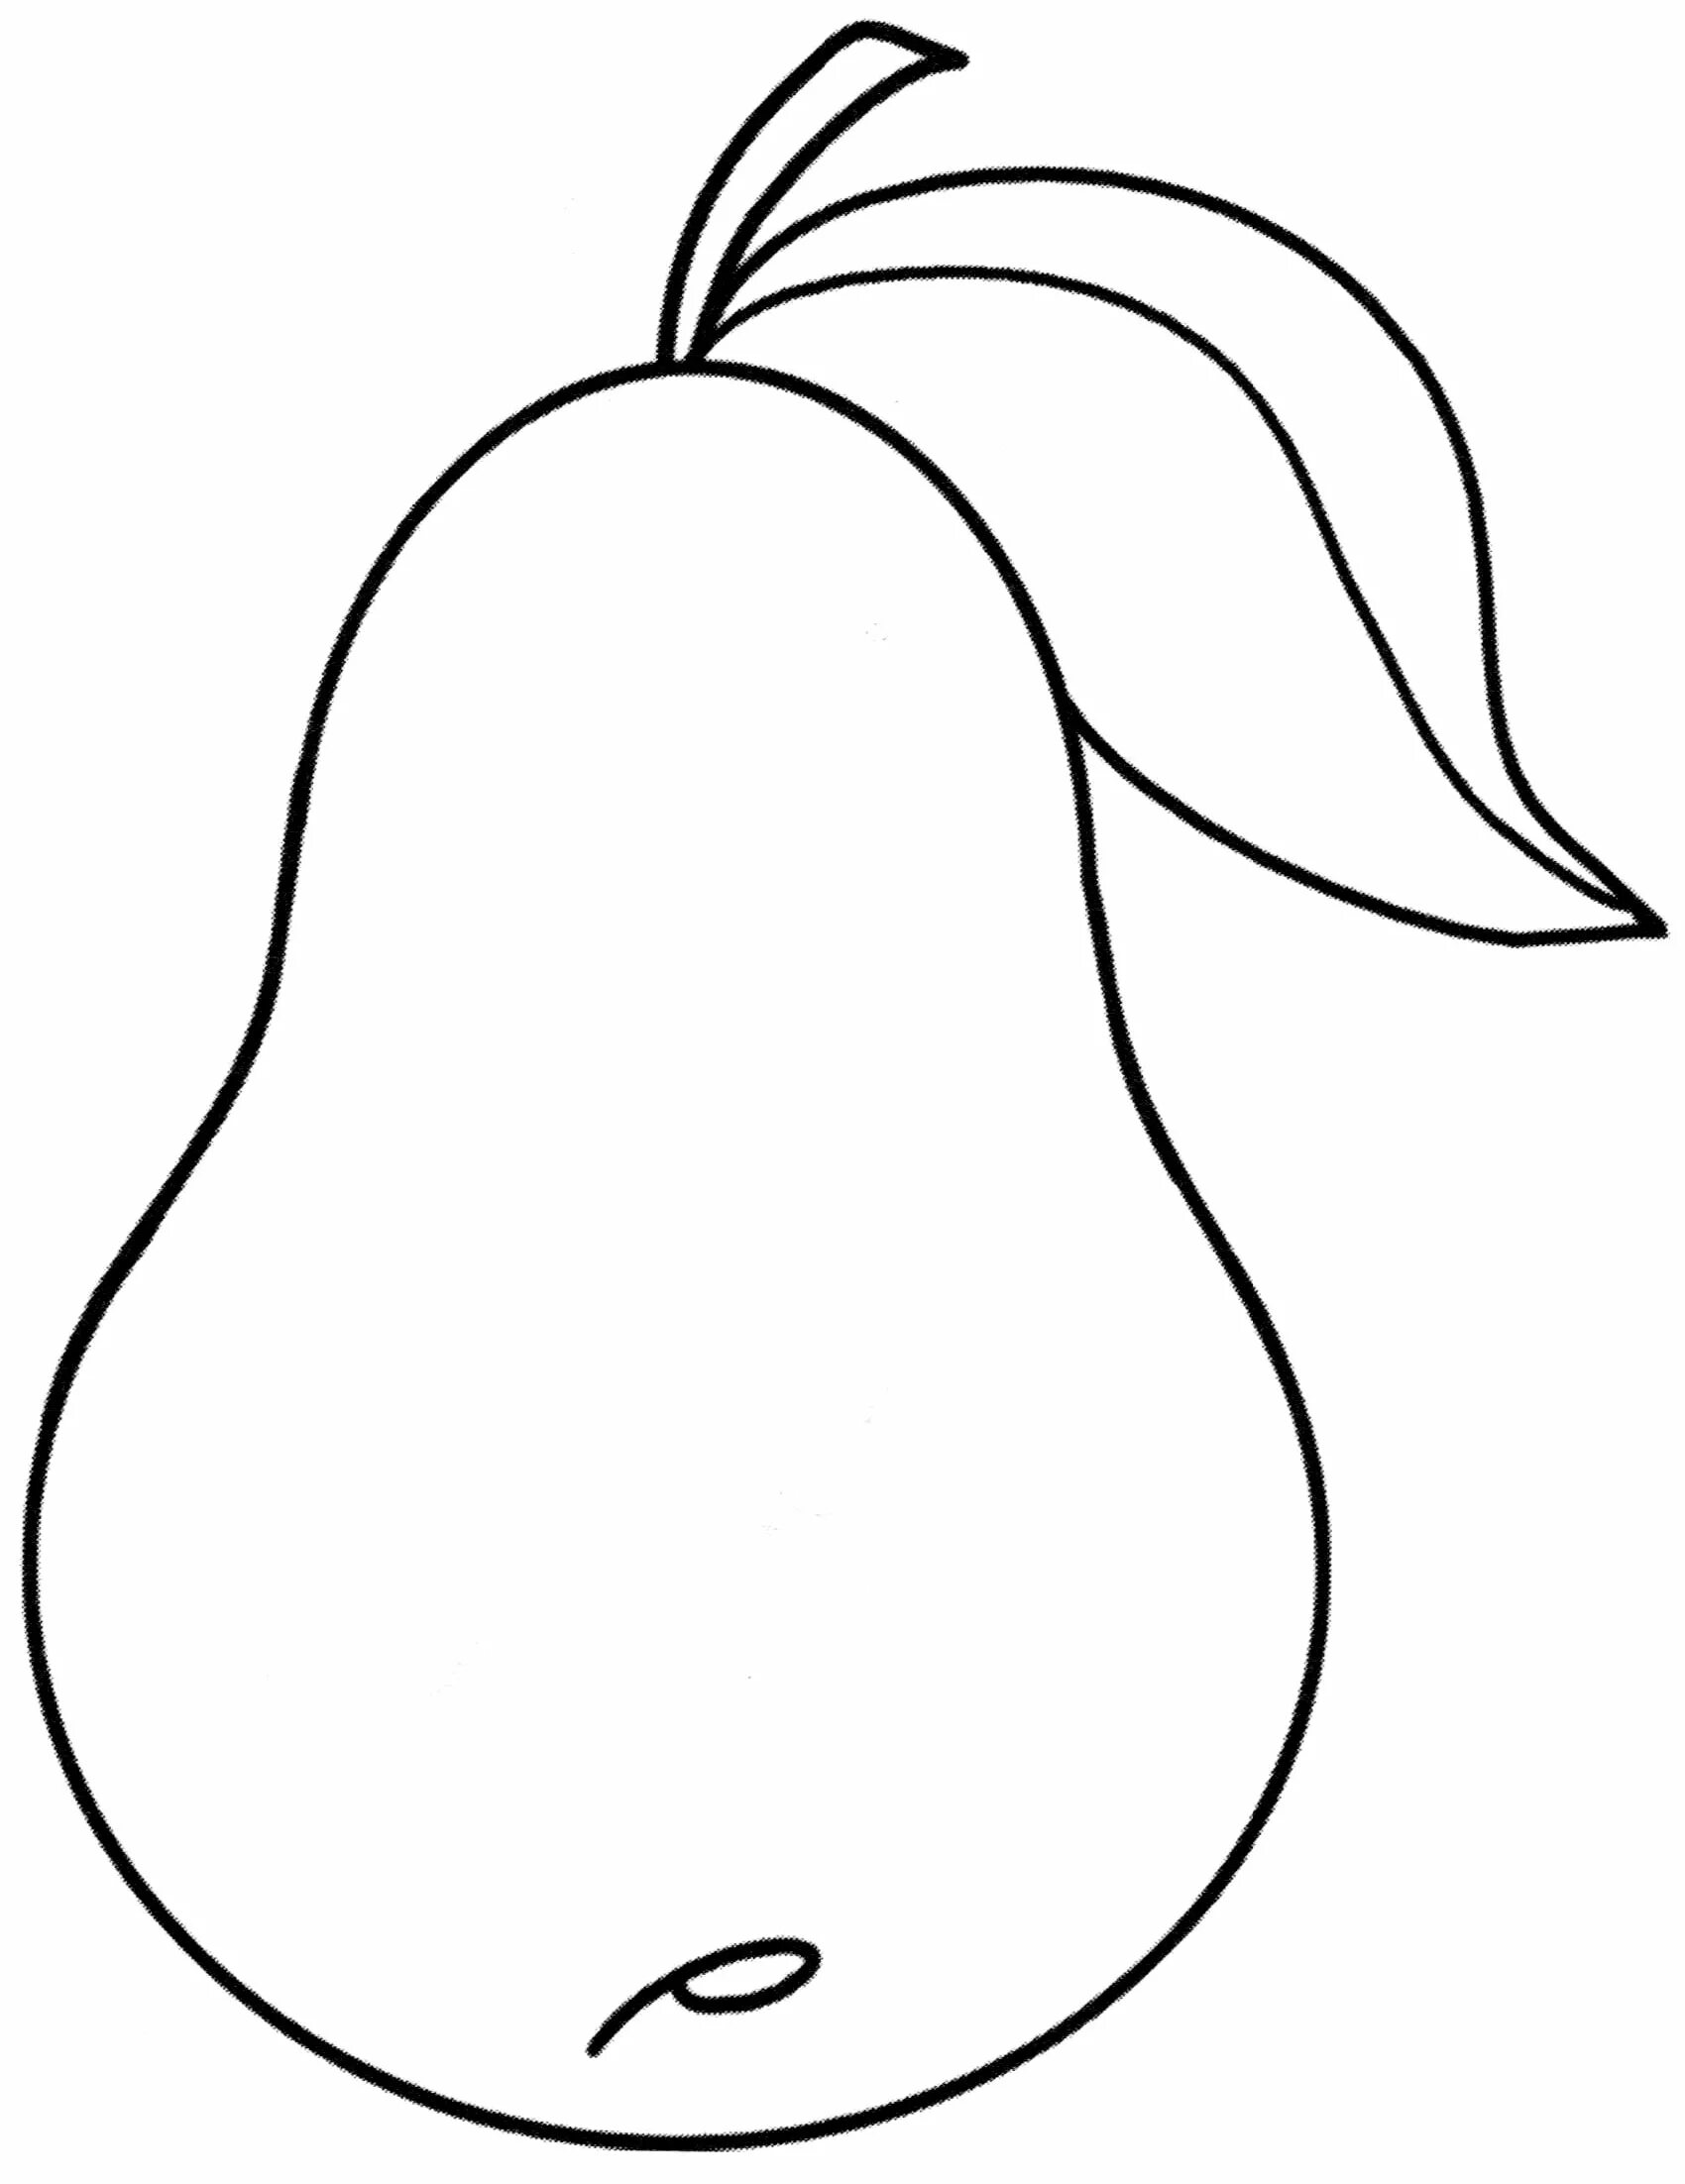 Coloring page joyful pear for children 3-4 years old